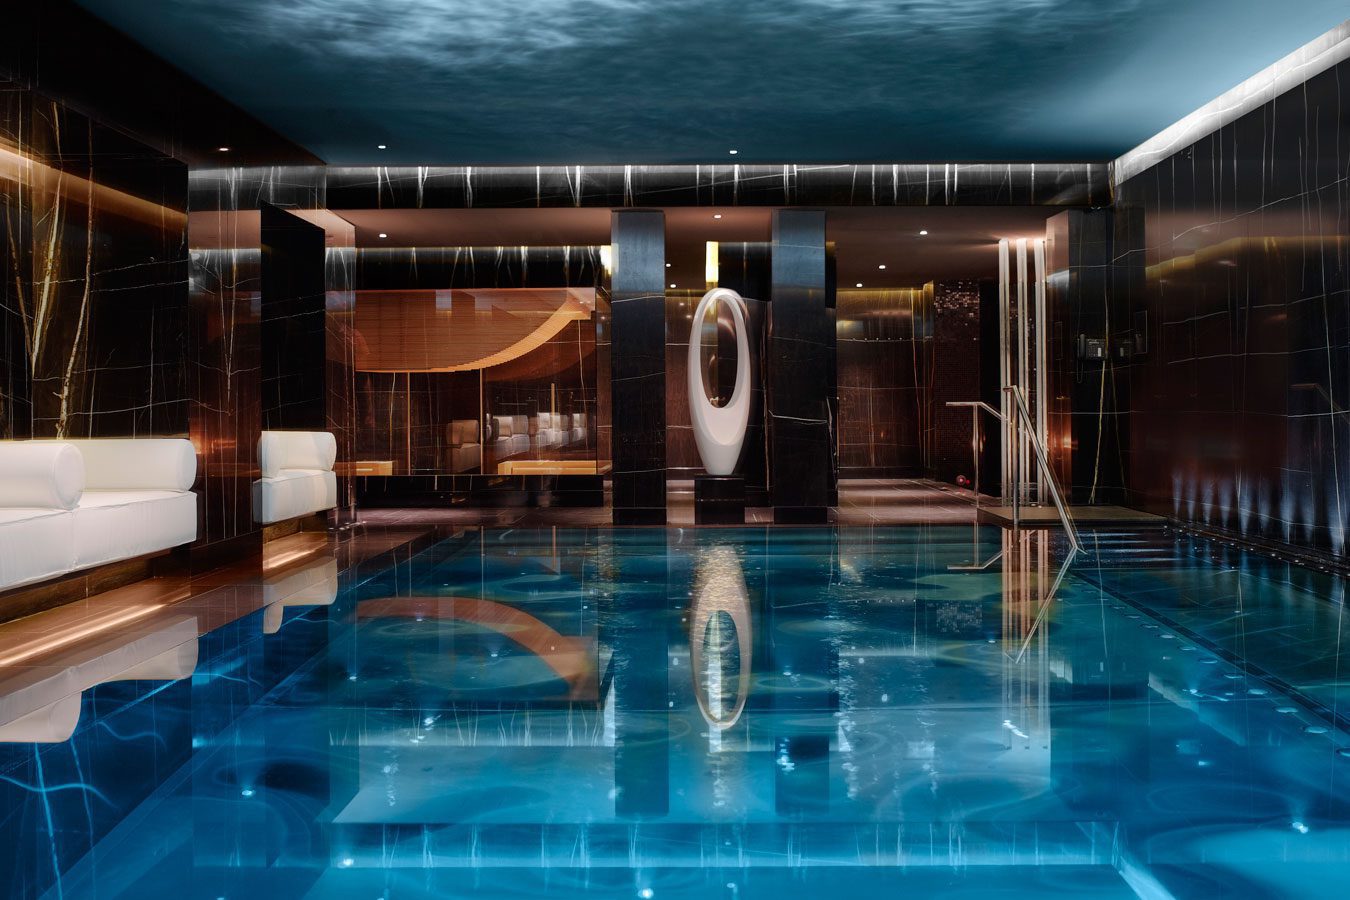 Review: We Check in to Corinthia & ESPA Life